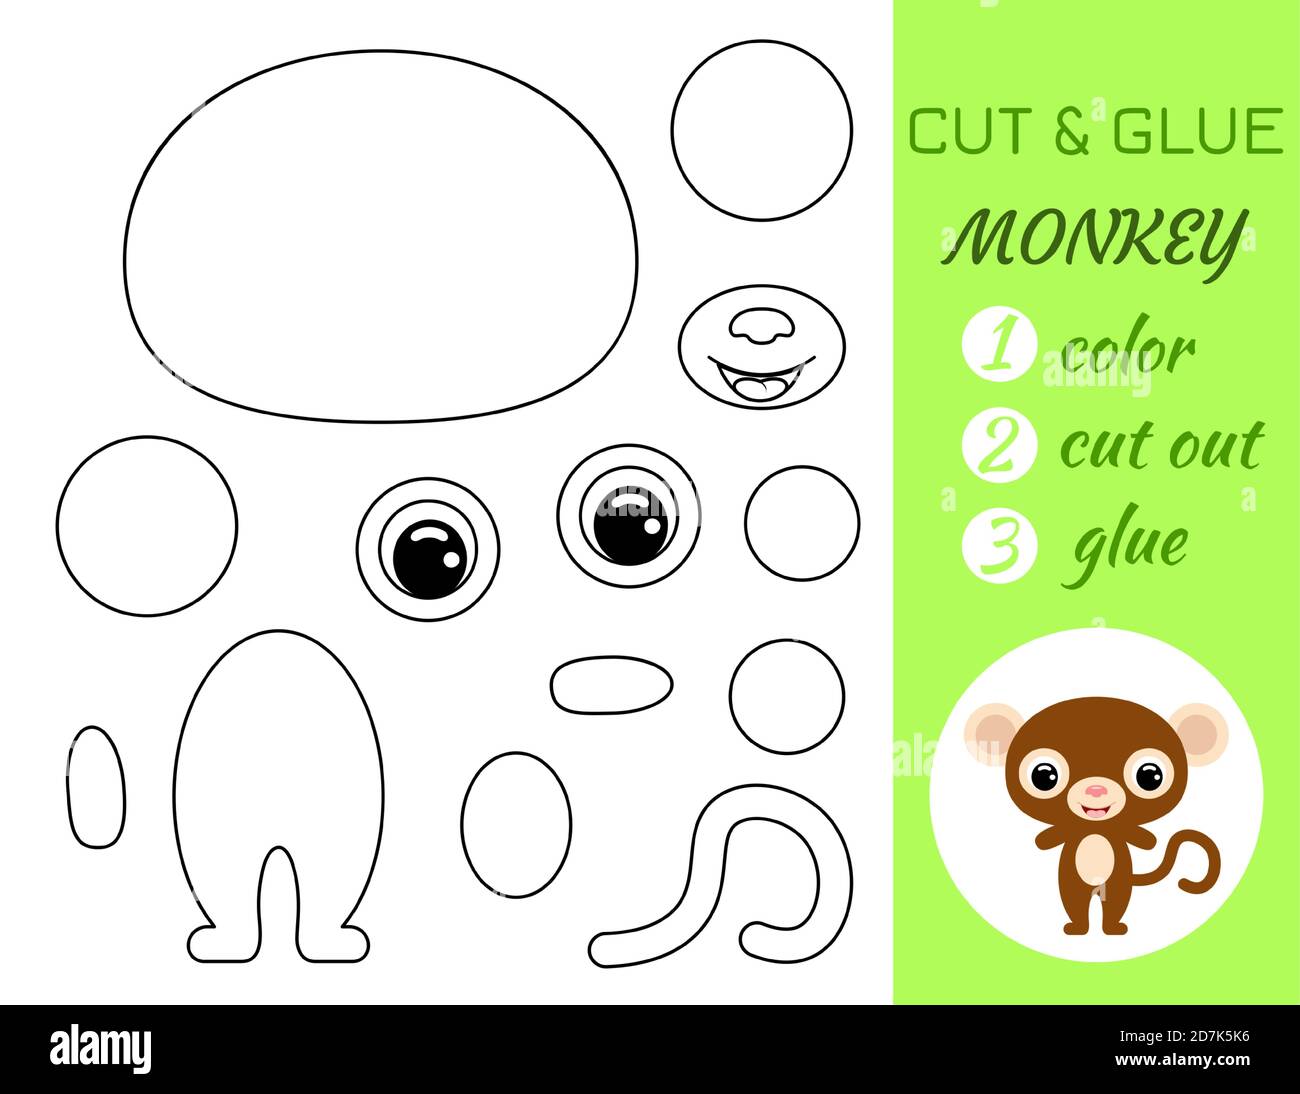 Coloring book cut and glue baby monkey. Educational paper game for ...